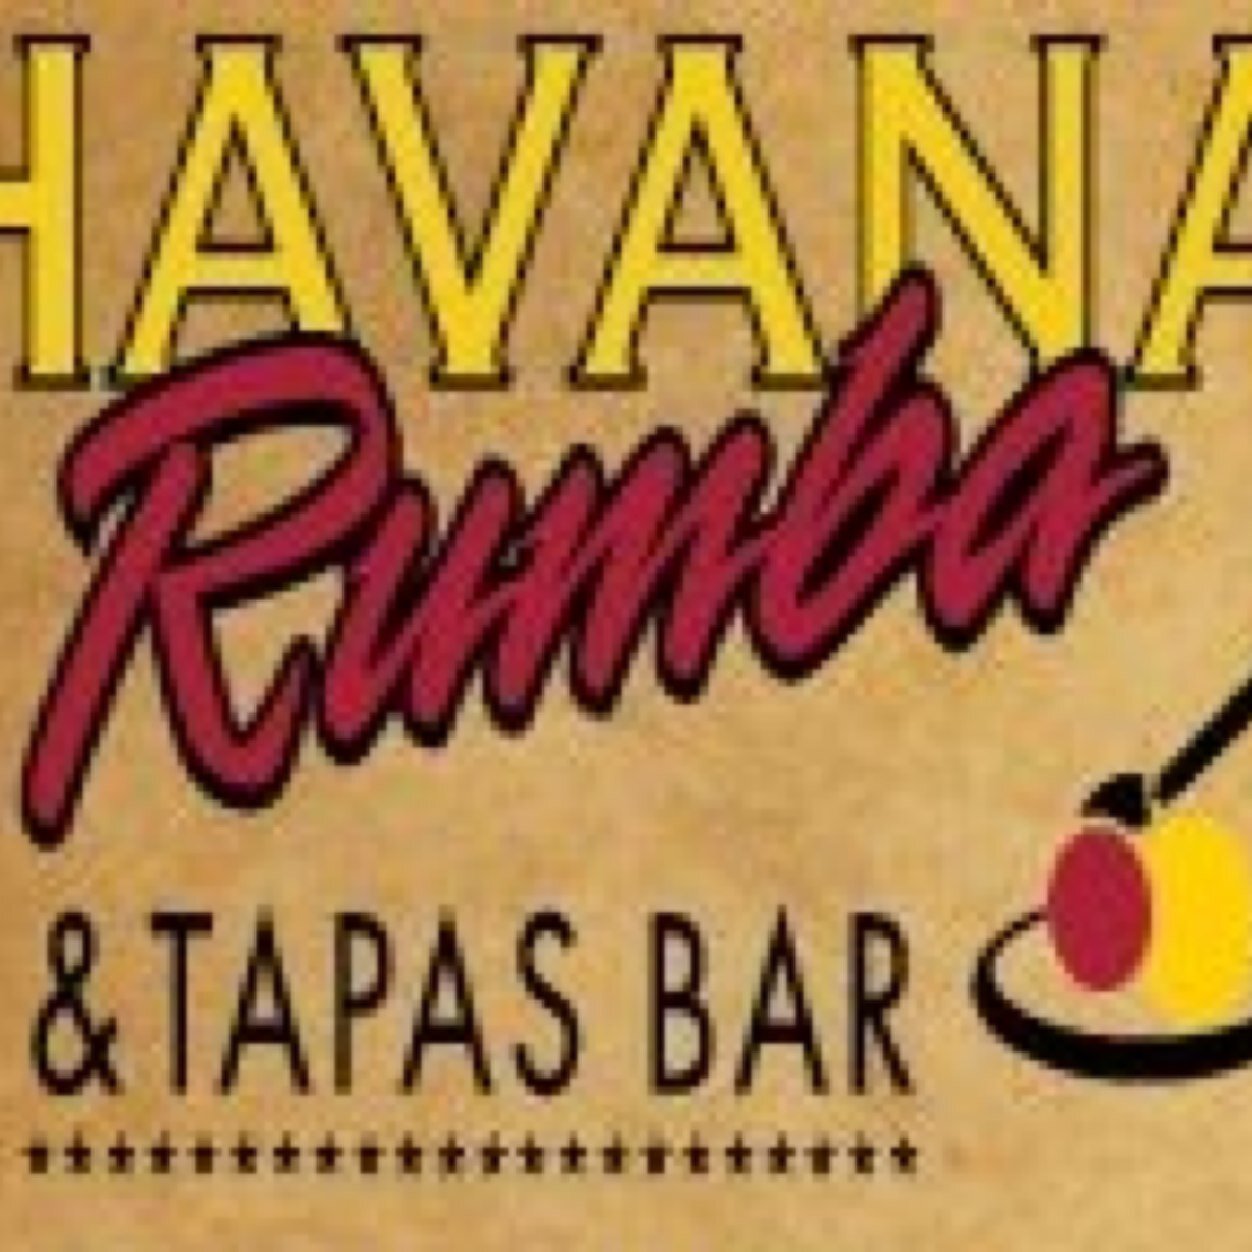 Cuban food and Spanish Tapas under one roof!! The coolest Tapas bar in the city! Visit us on The Highlands! Buen provecho!